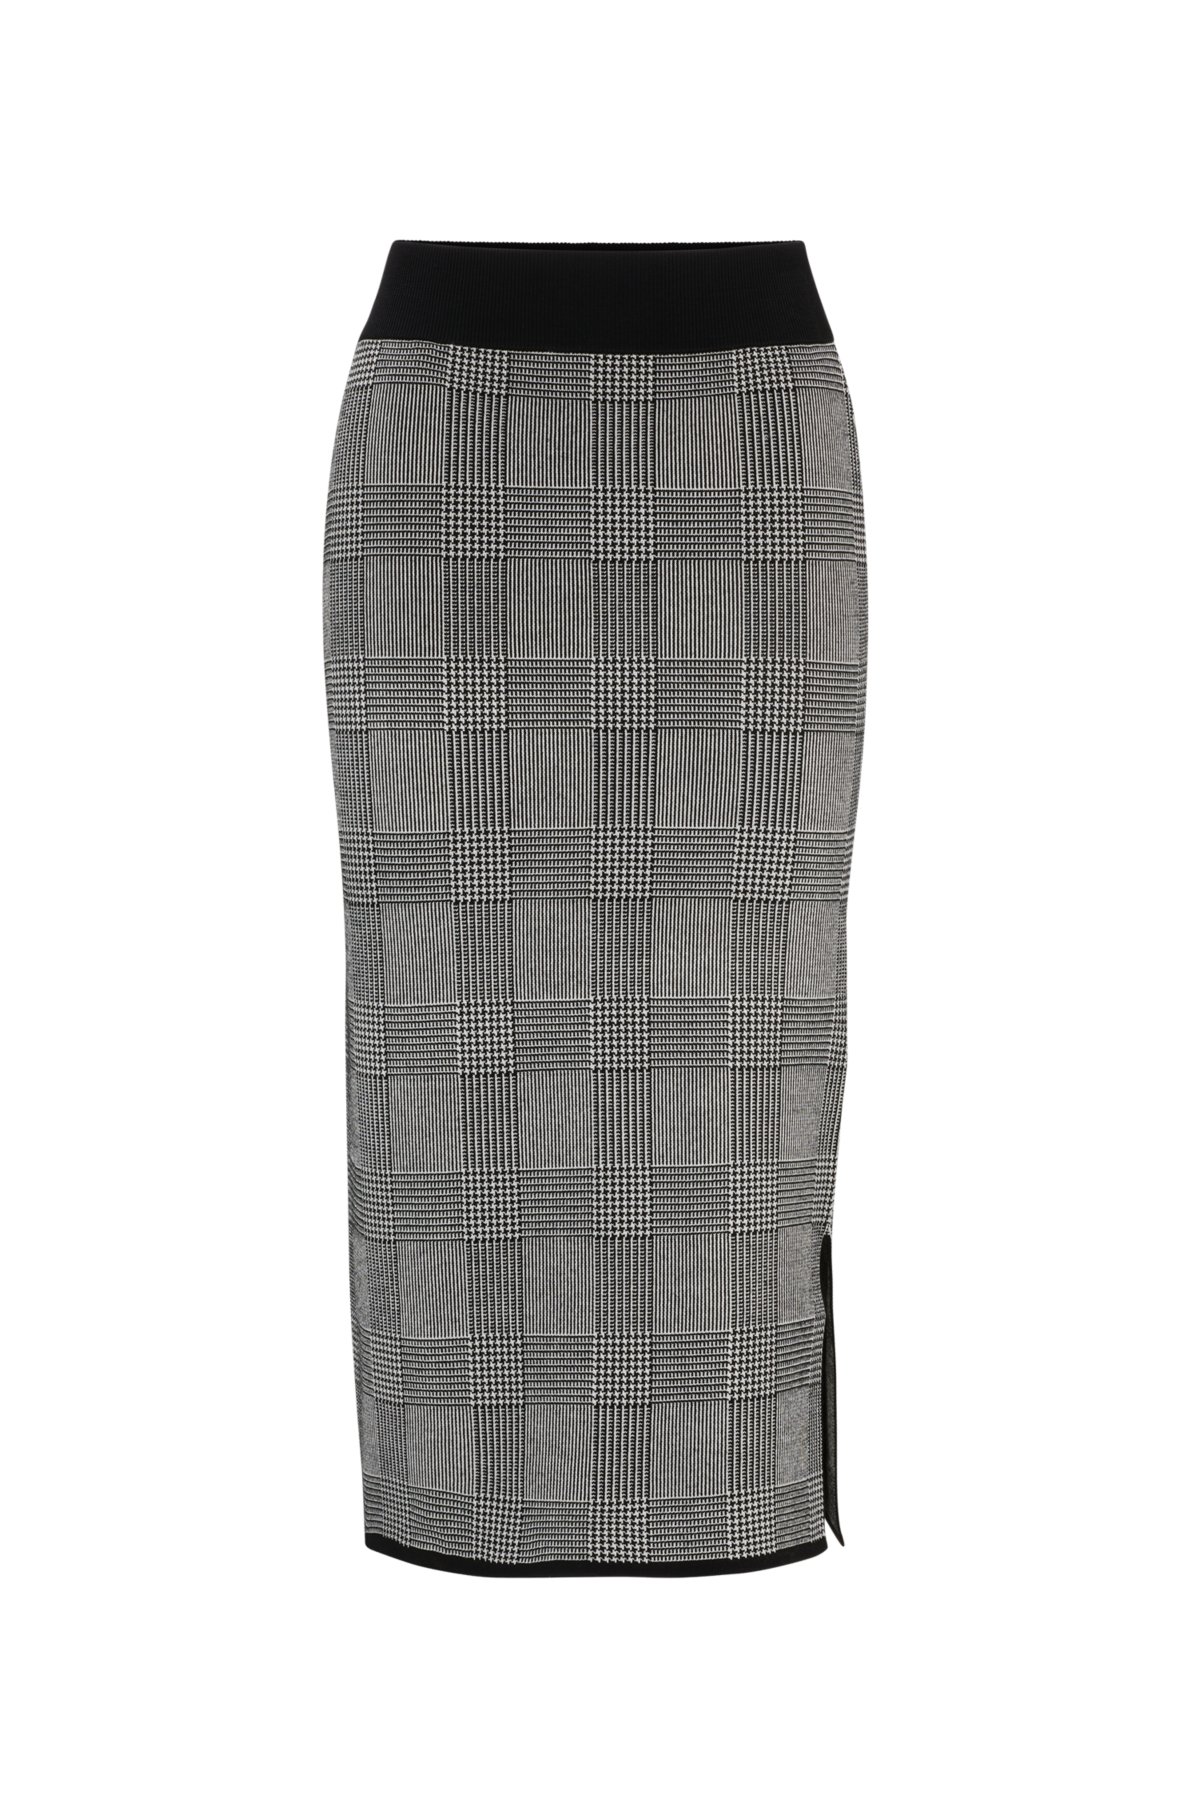 Pencil skirt in knitted jacquard, Black Patterned